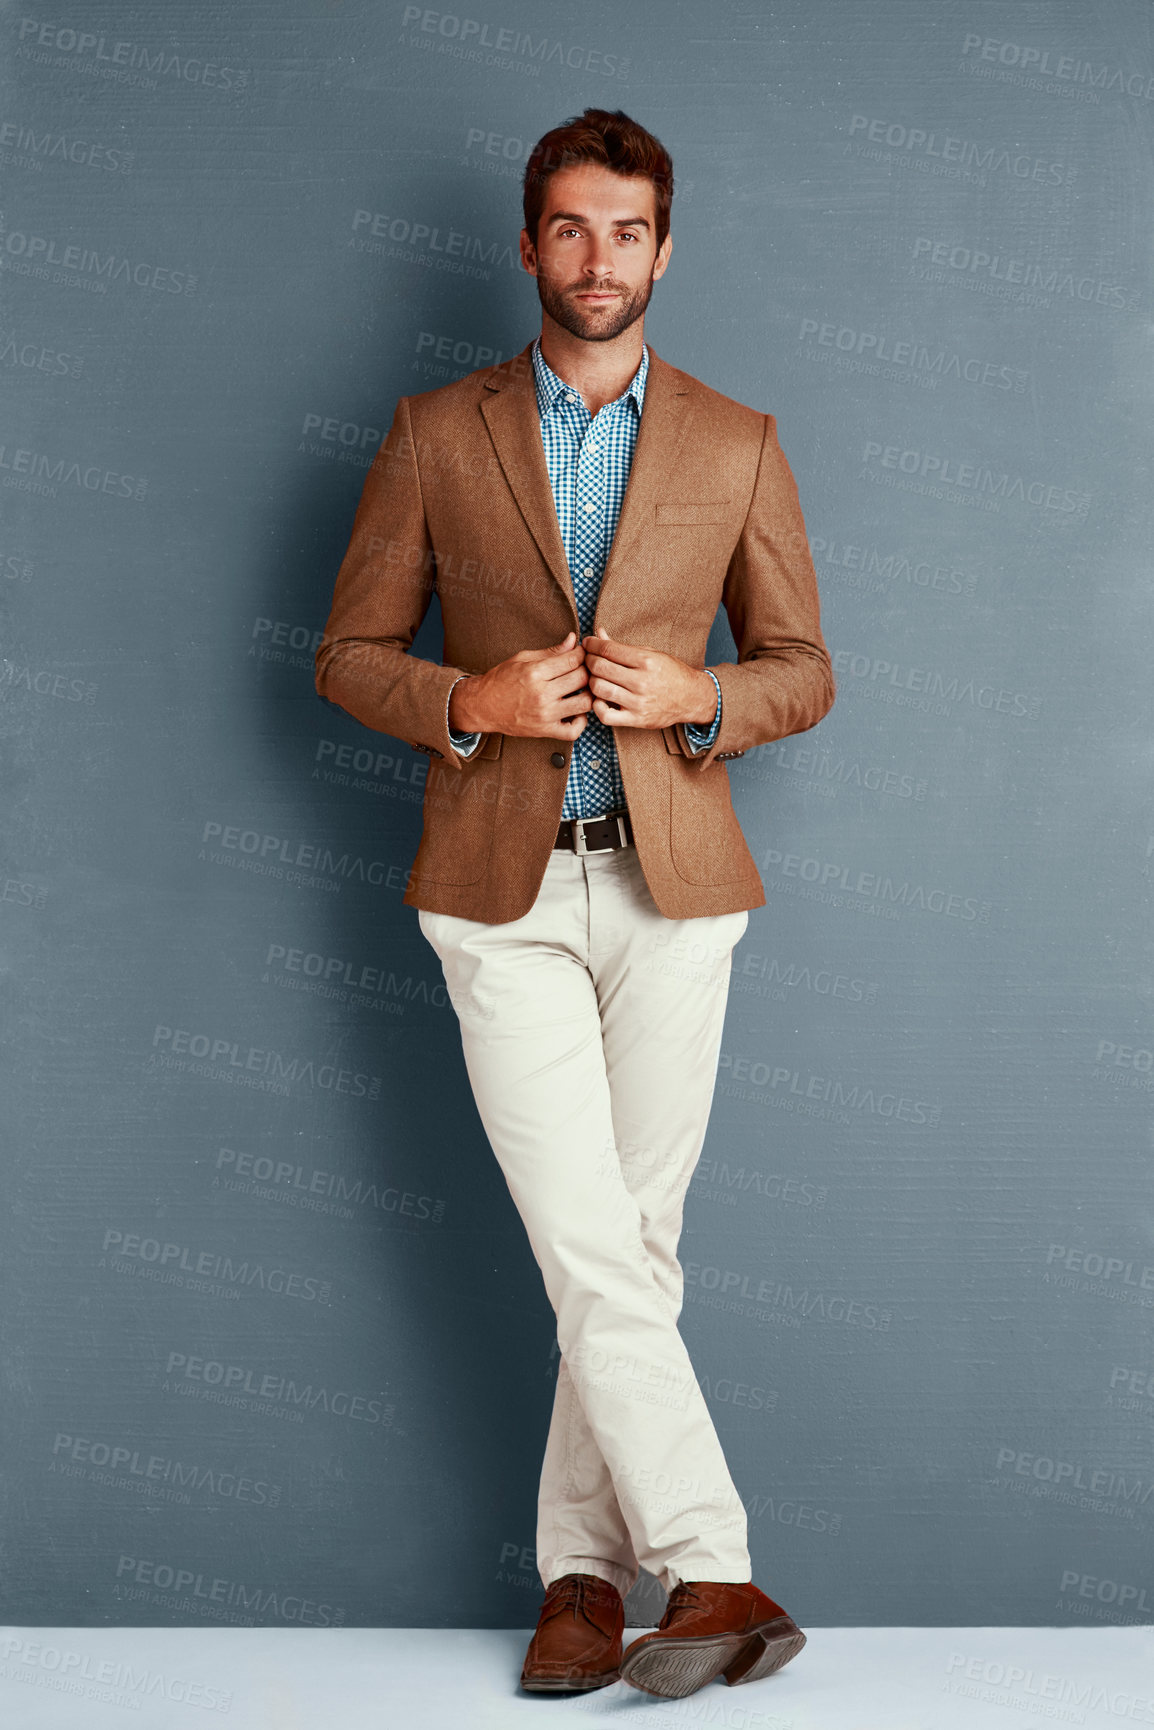 Buy stock photo Trendy, fashion and portrait of man with confidence, creative and professional pride in studio. Businessman, cool style and male model on grey background with wall, opportunity and designer clothes